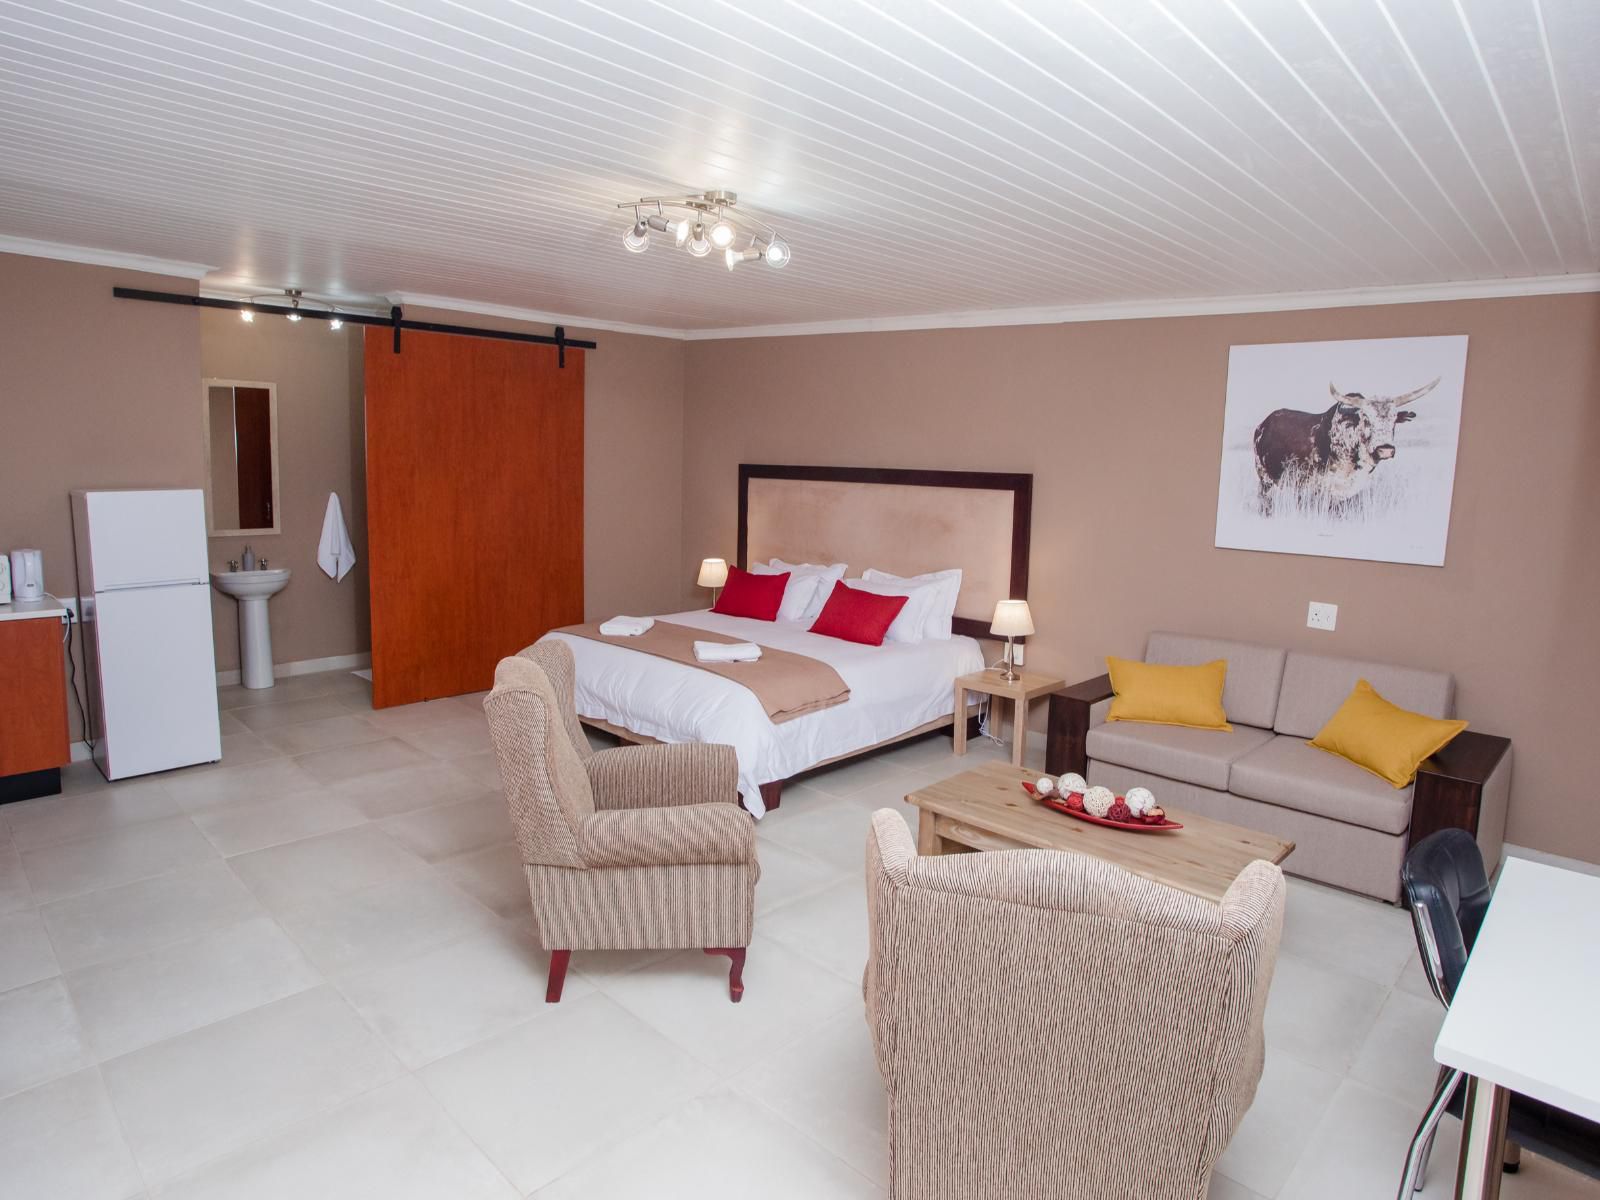 4 Gazelle Guesthouse The Rest 454 Jt Nelspruit Mpumalanga South Africa Unsaturated